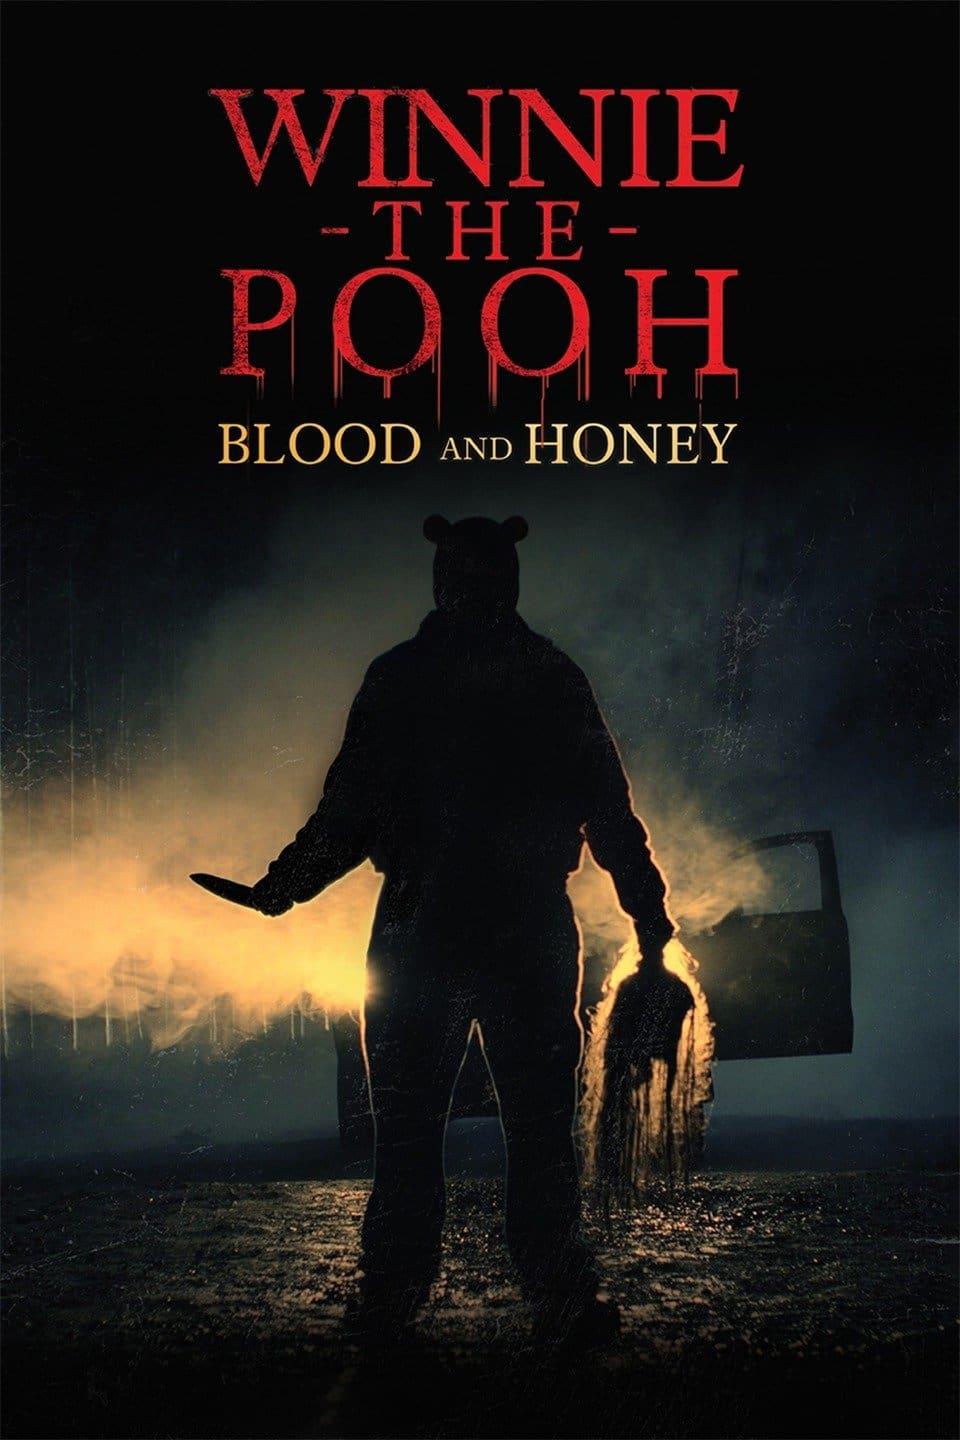 Winnie the Pooh: Blood and Honey poster